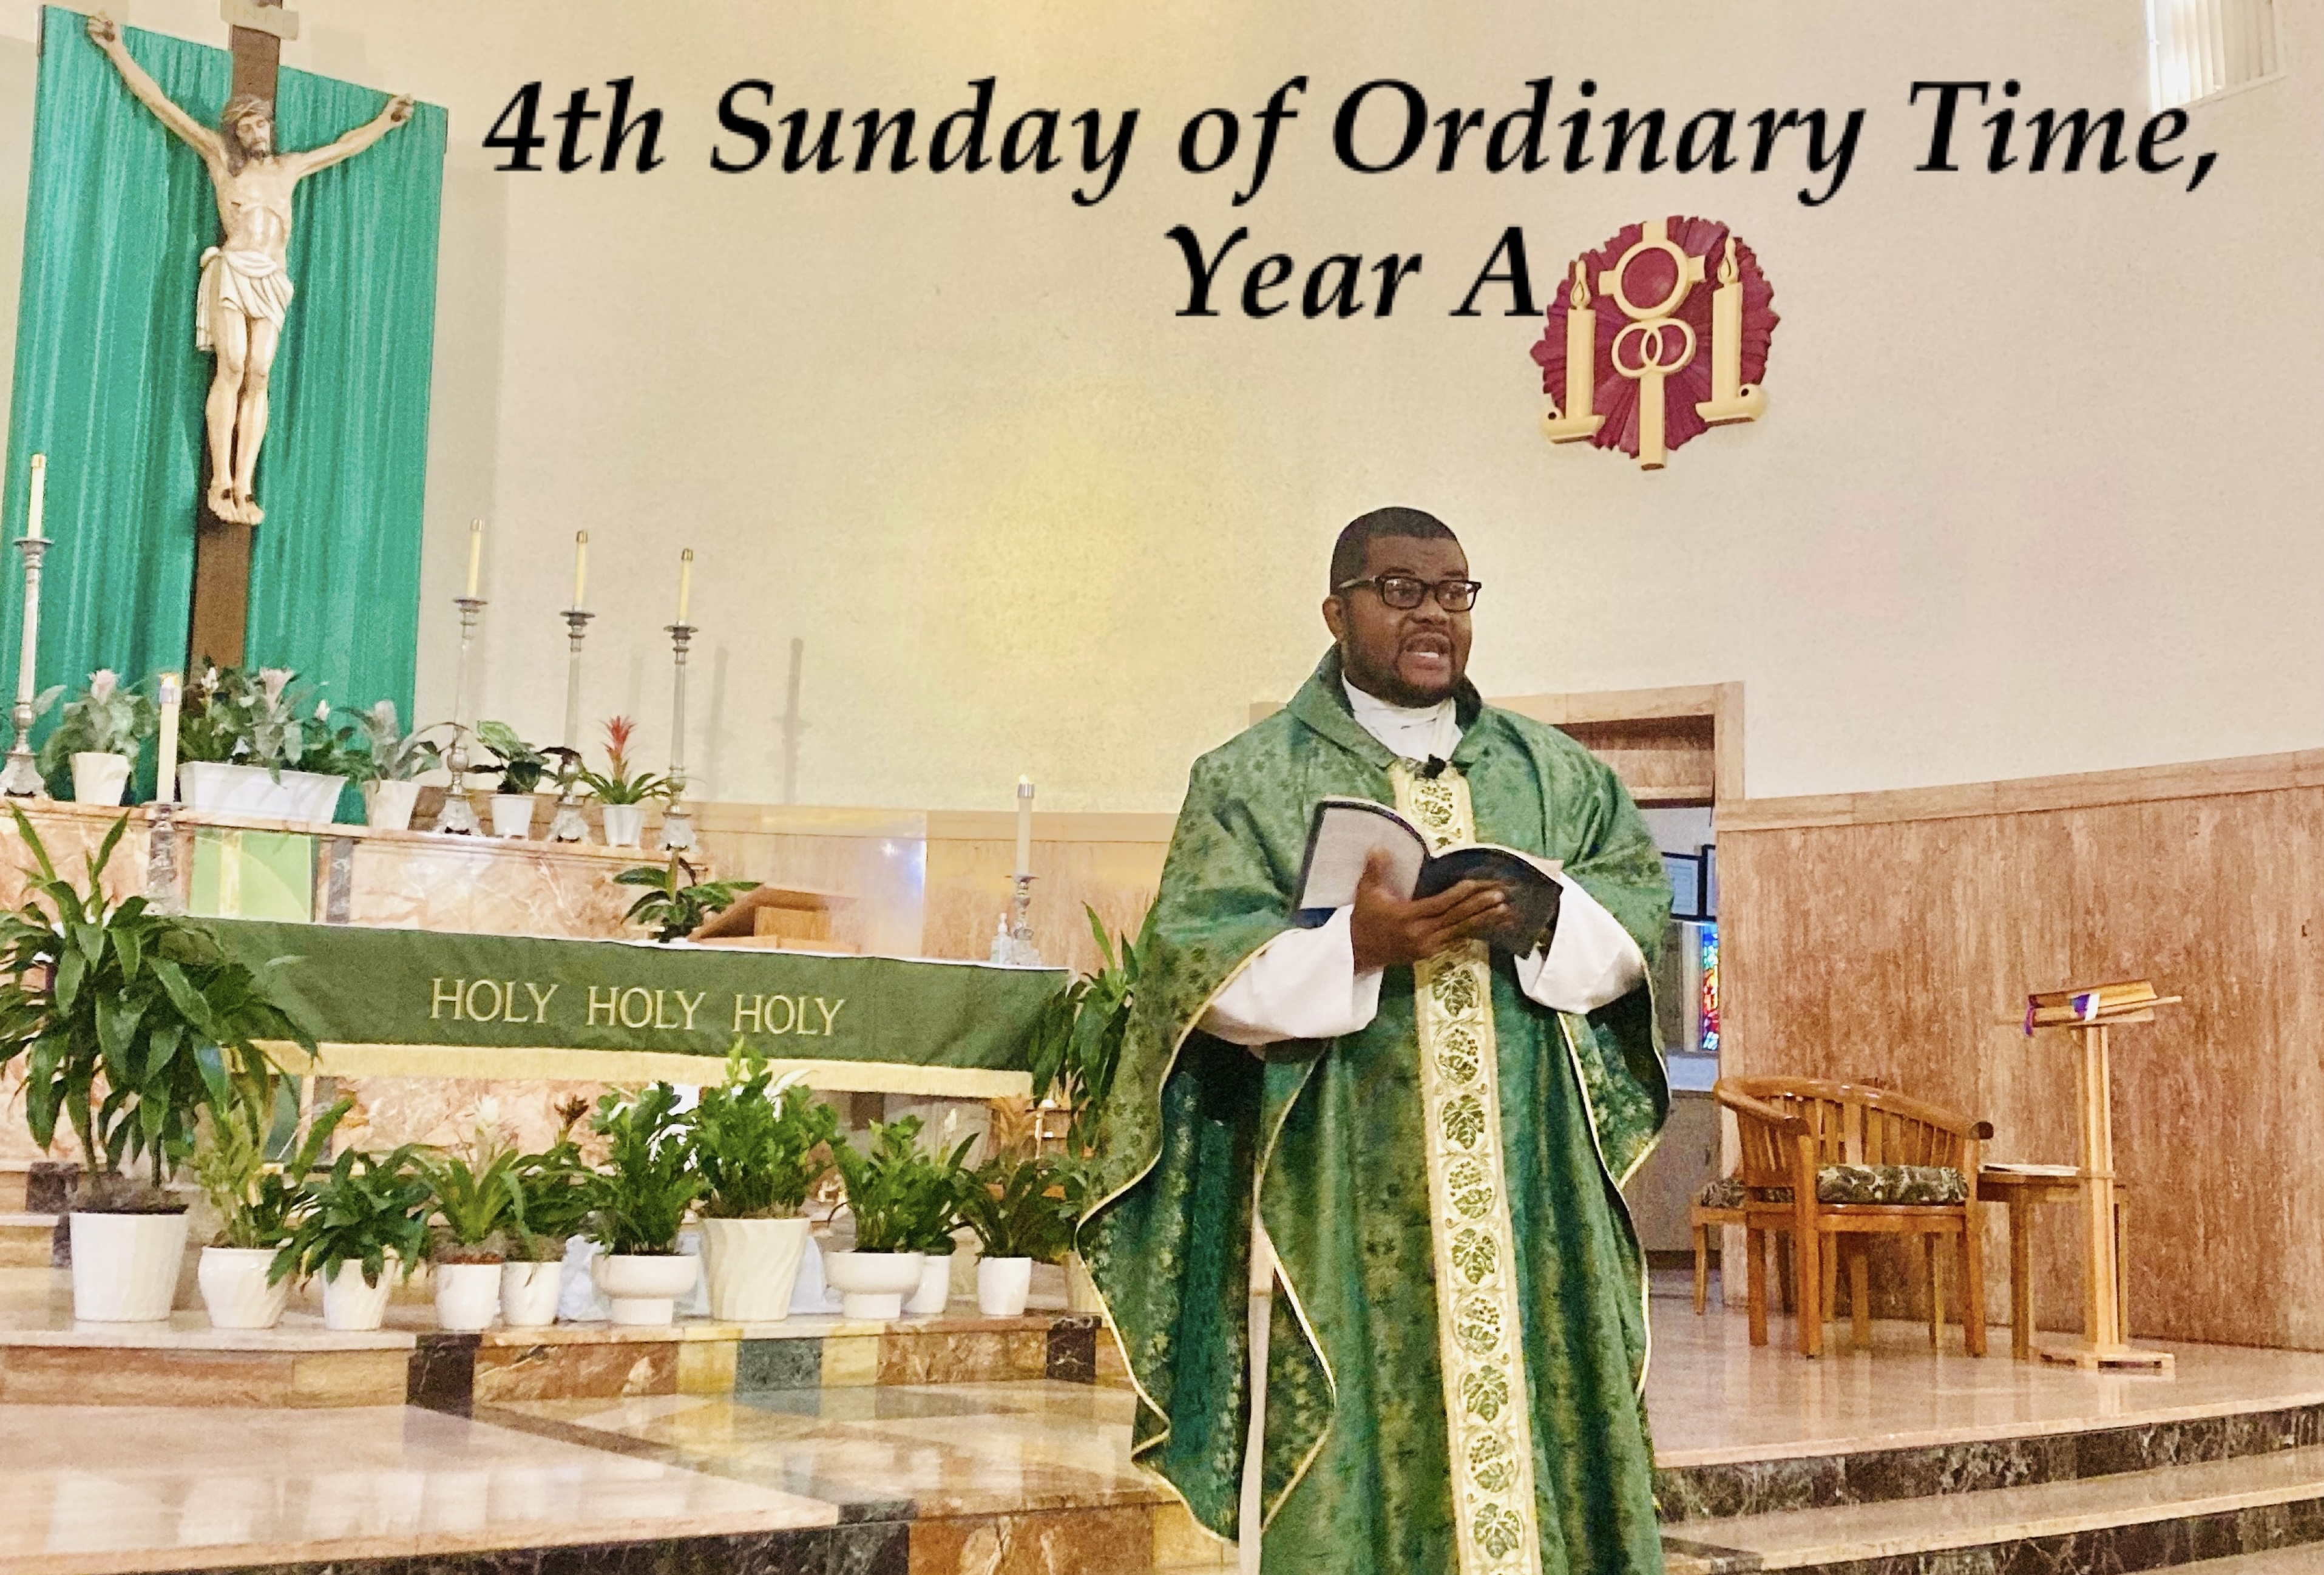 4th Sunday of Ordinary Time, Year A